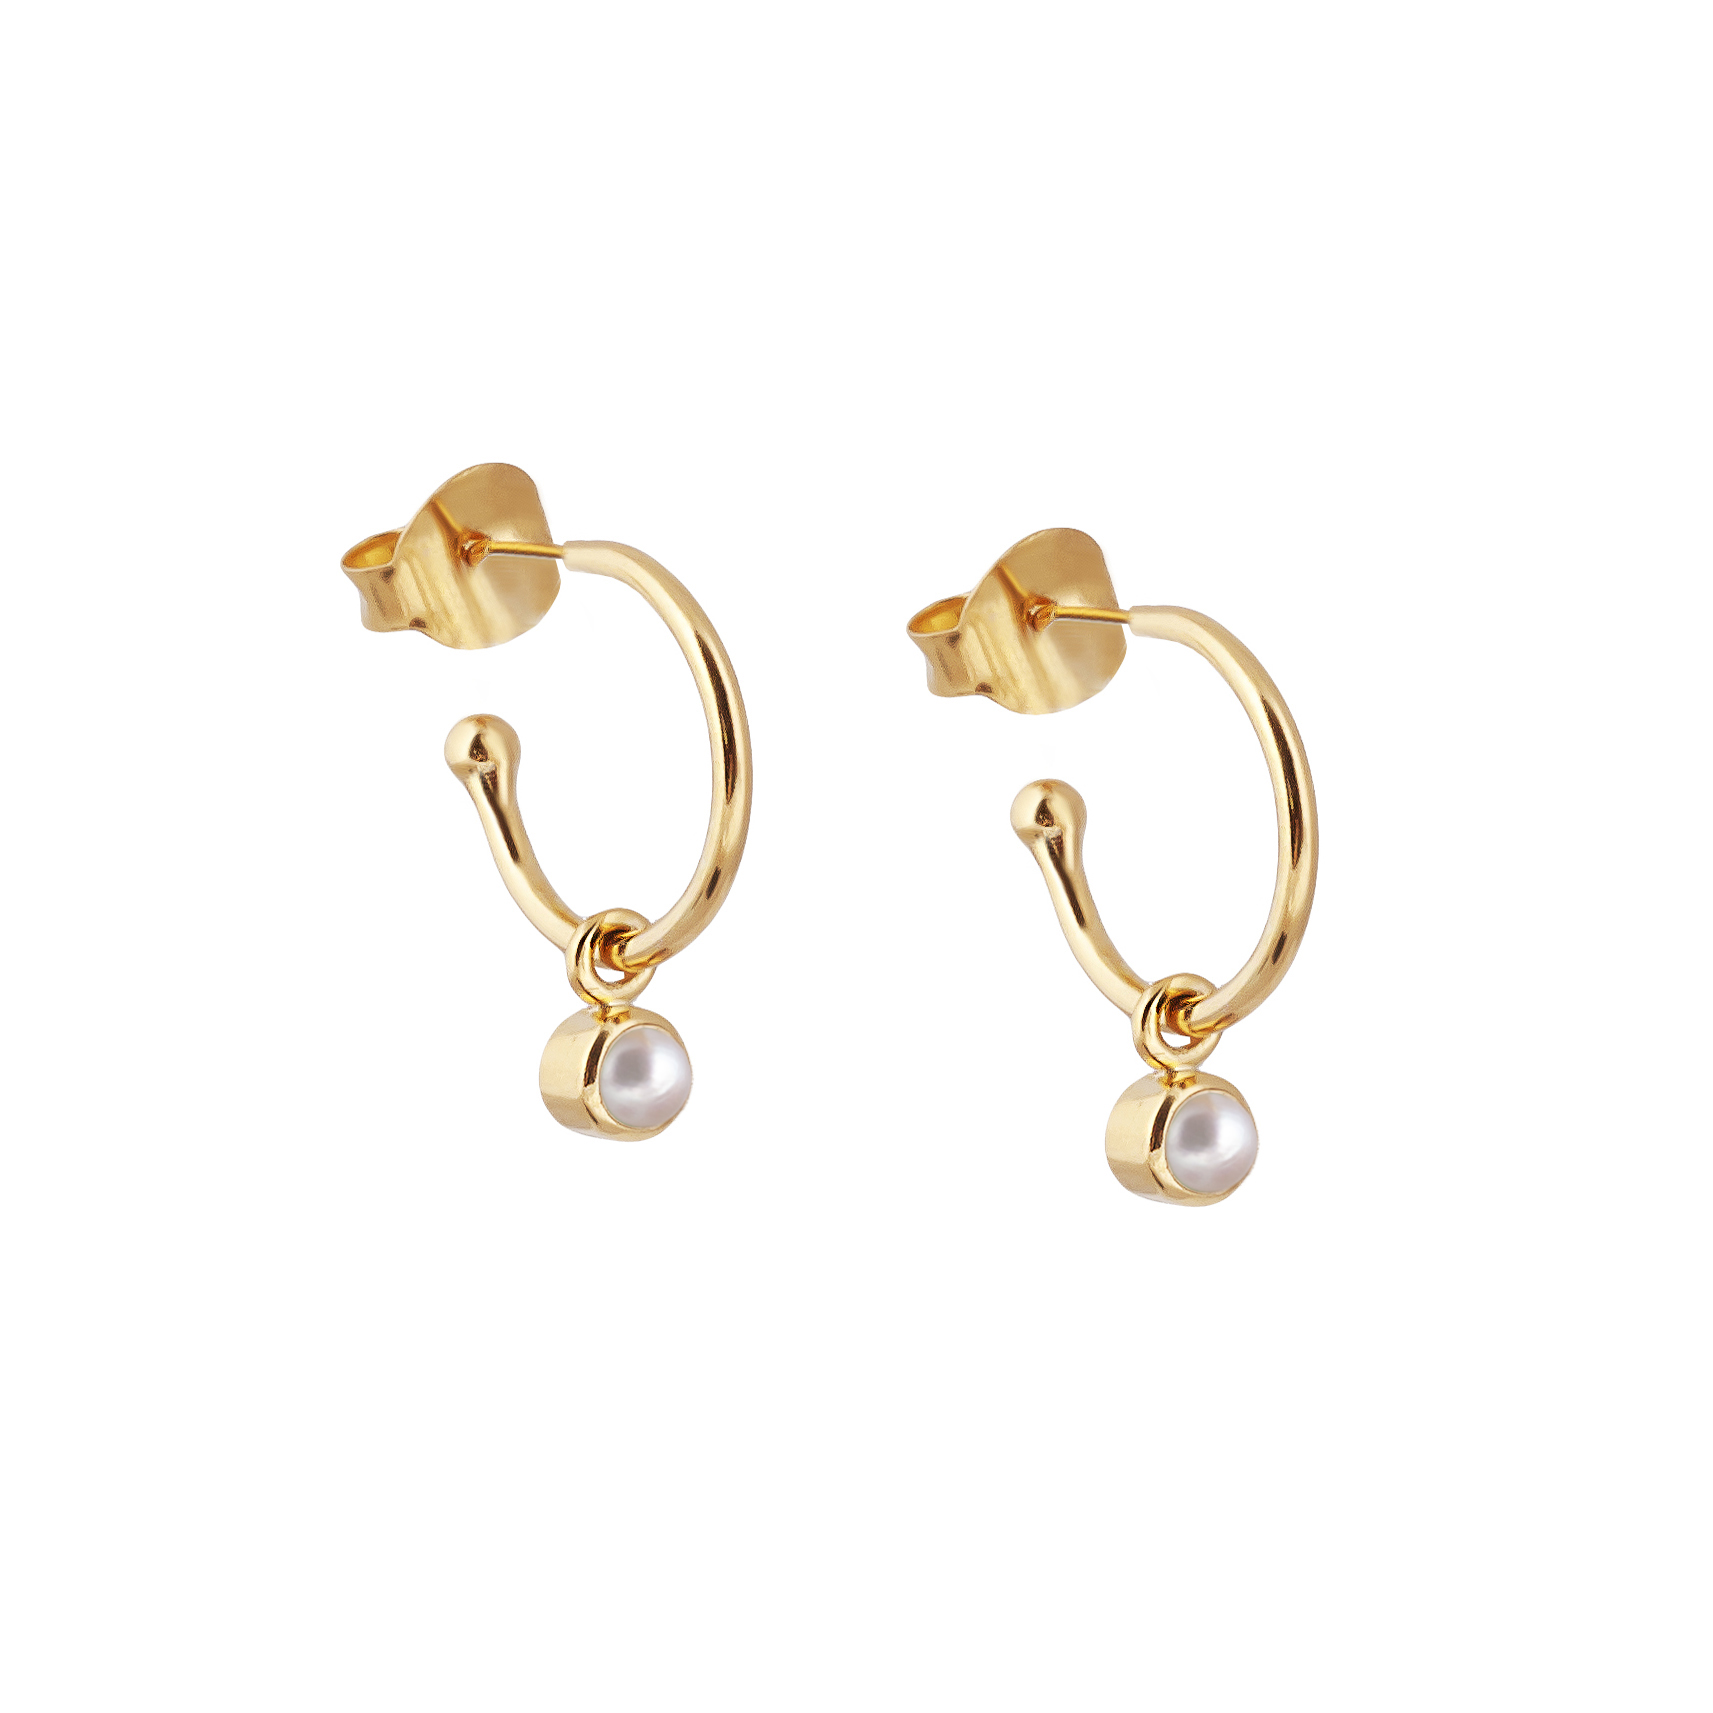 Discover 266+ stylish gold earrings best